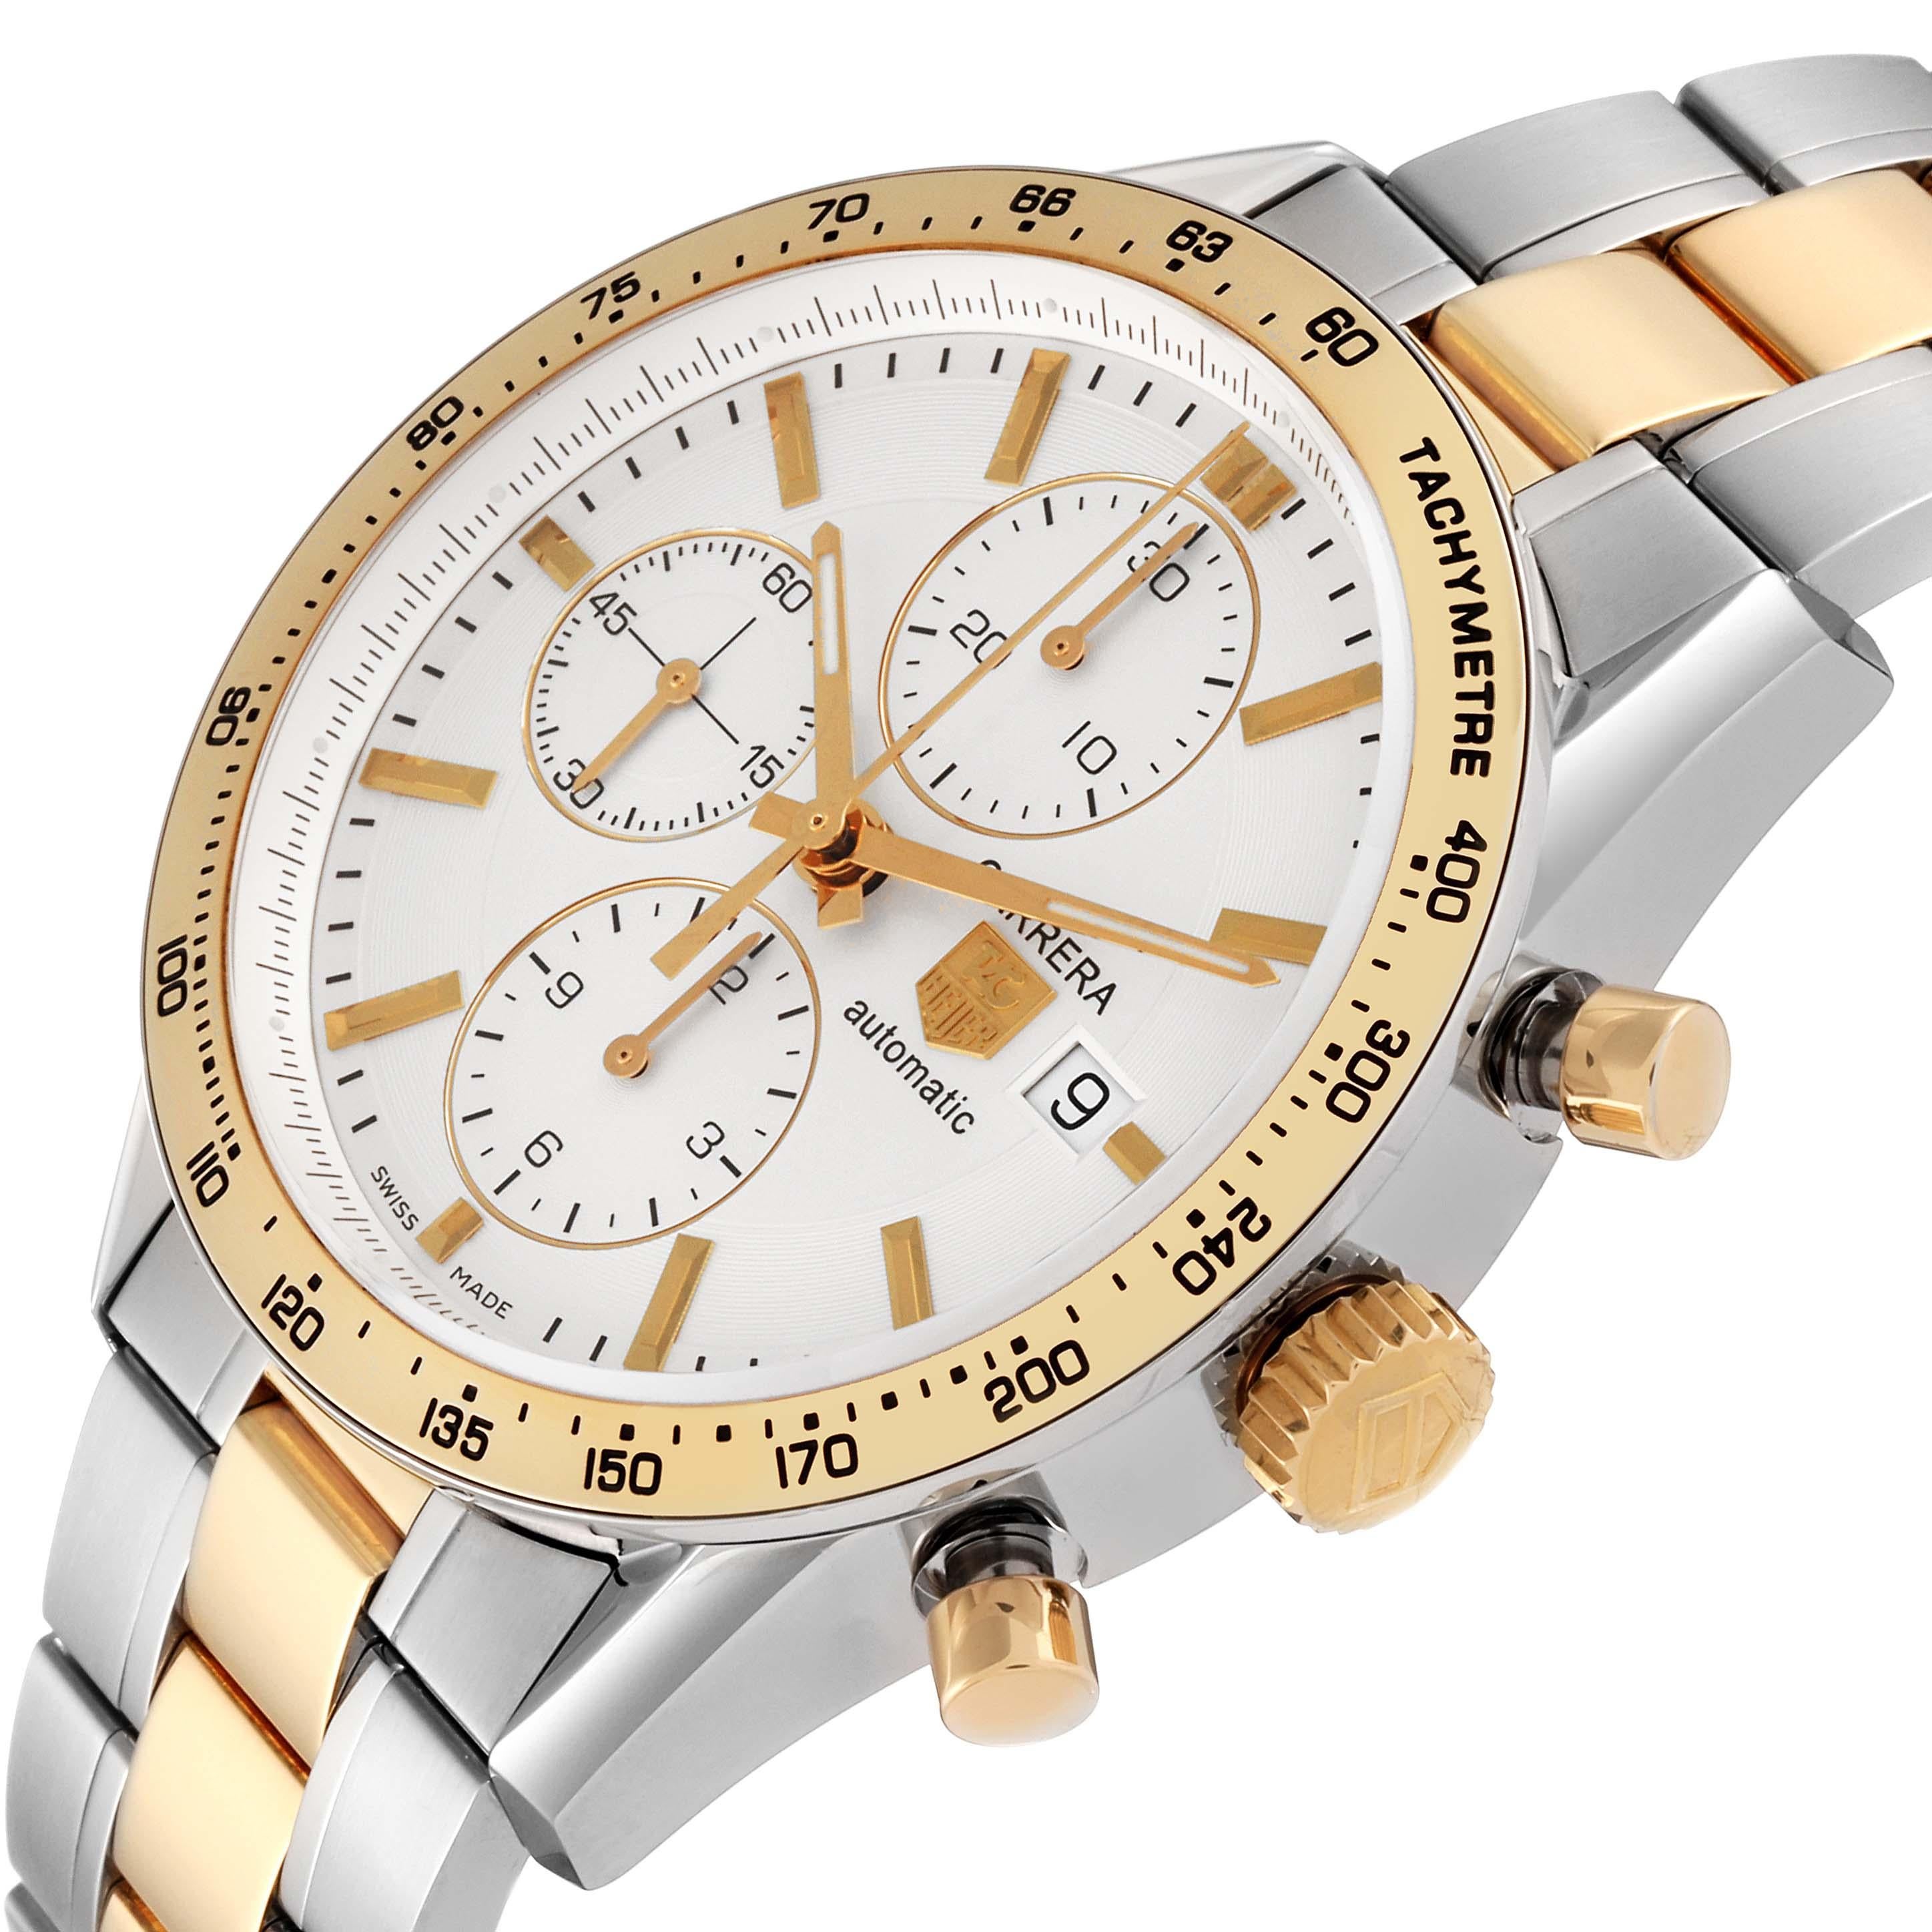 Tag Heuer Carrera Steel Yellow Gold Chronograph Mens Watch CV2050 Box Card. Automatic self-winding movement. Polished stainless steel case 41.0 mm with yellow gold chronograph pushers and a crown. Transparent exhibition sapphire crystal caseback.